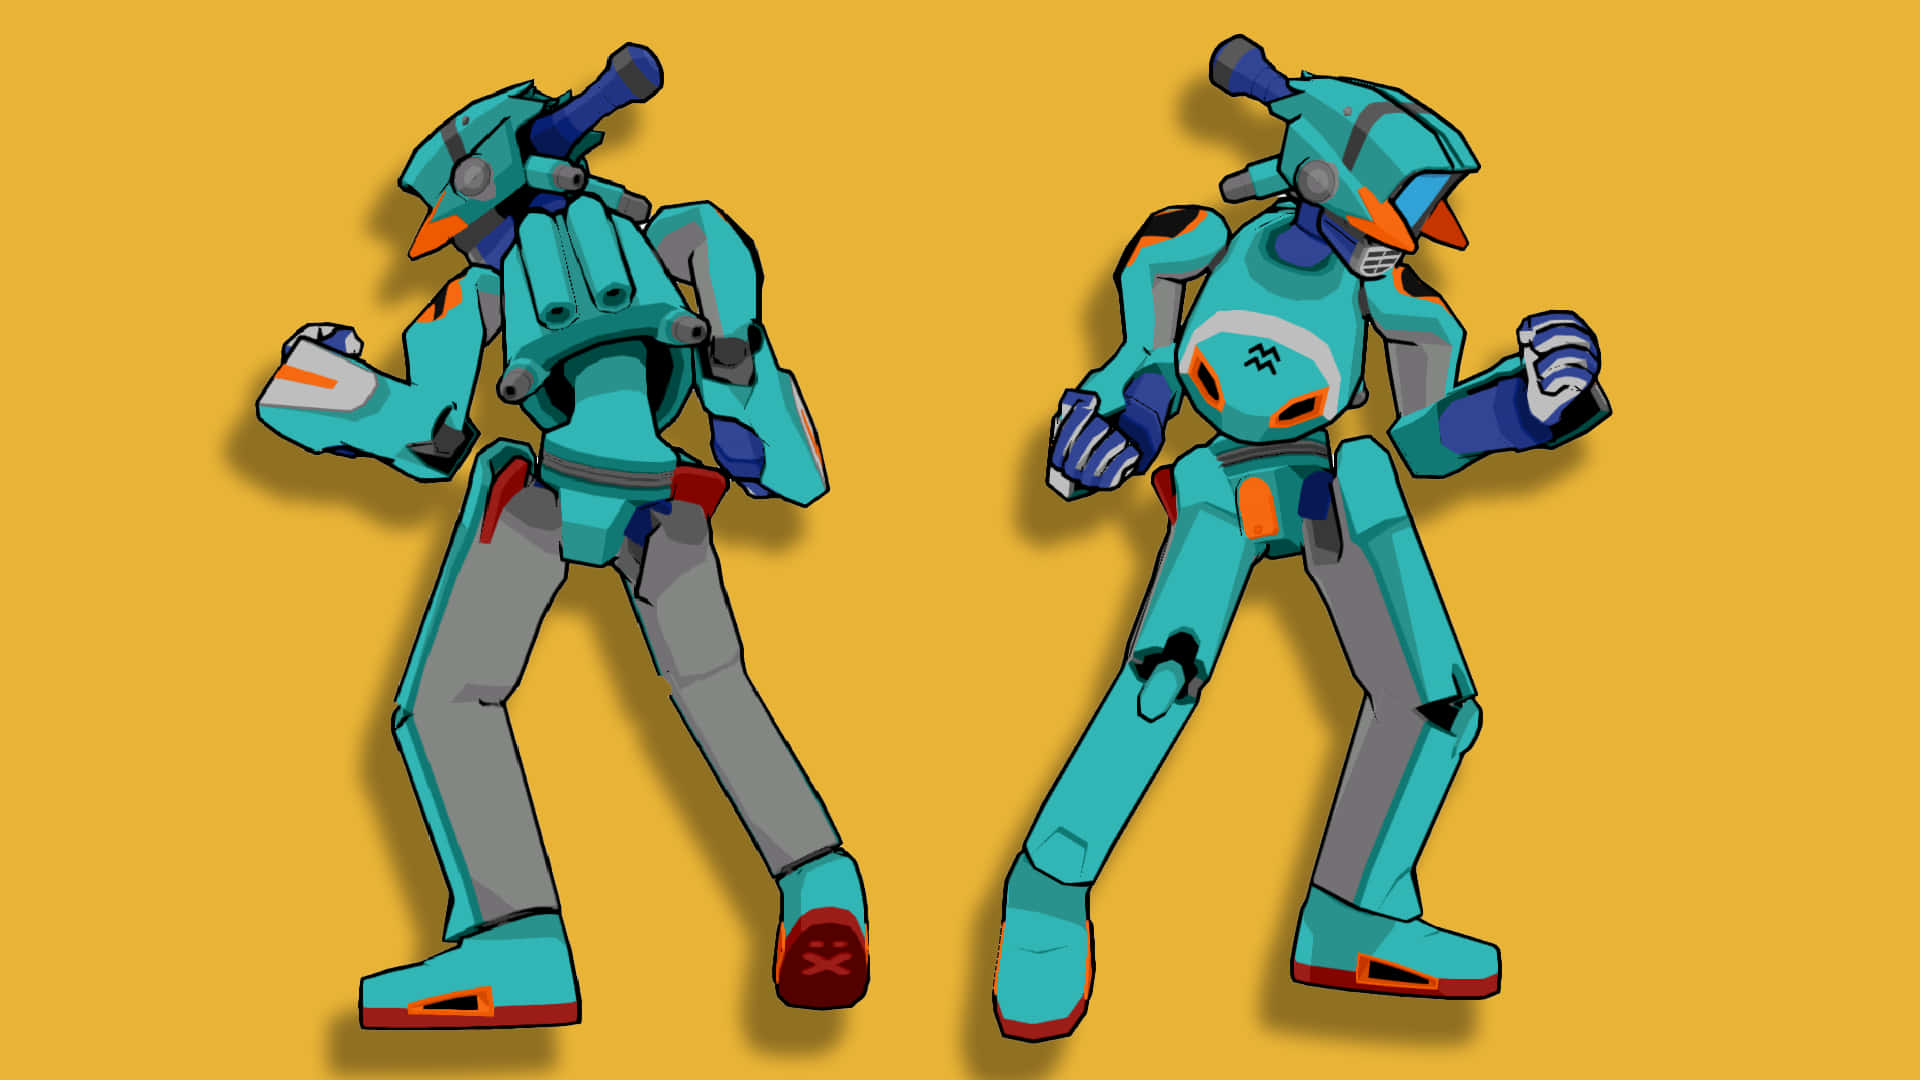 Canti, the iconic robot from FLCL, in a mesmerizing pose Wallpaper